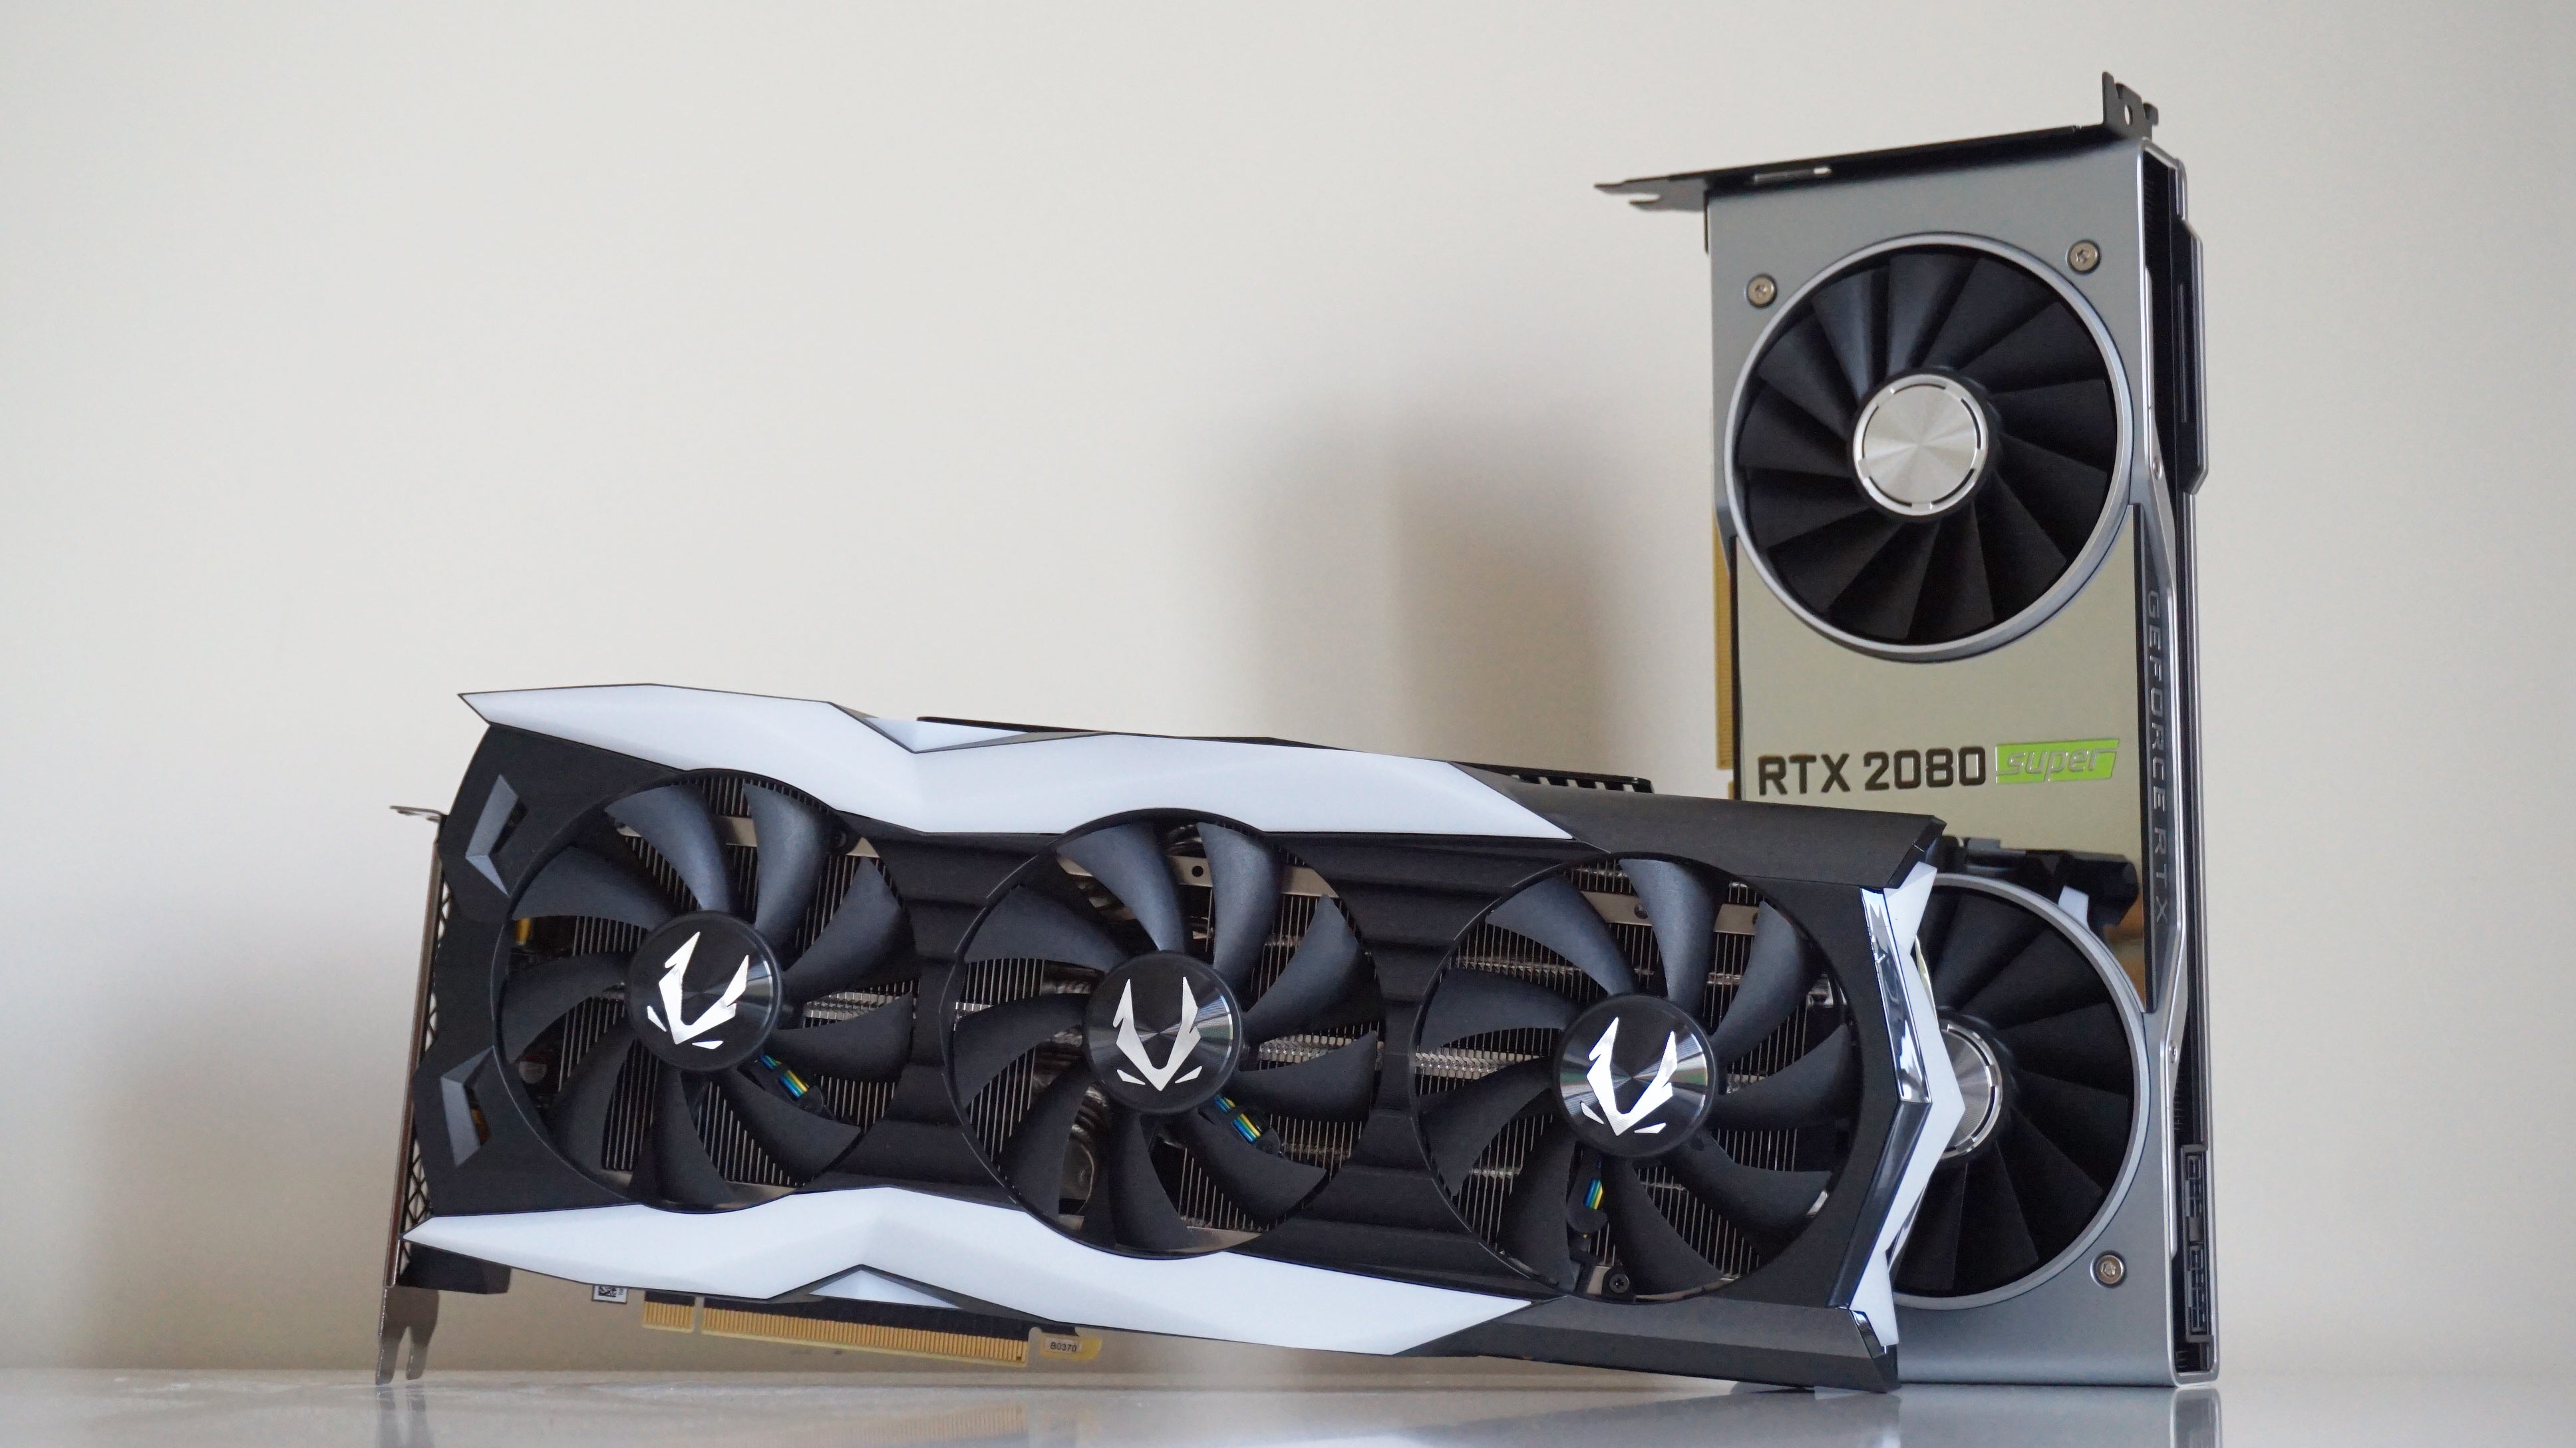 Nvidia RTX 2080 Super benchmarks: Should you pay more for an OC card? | Paper